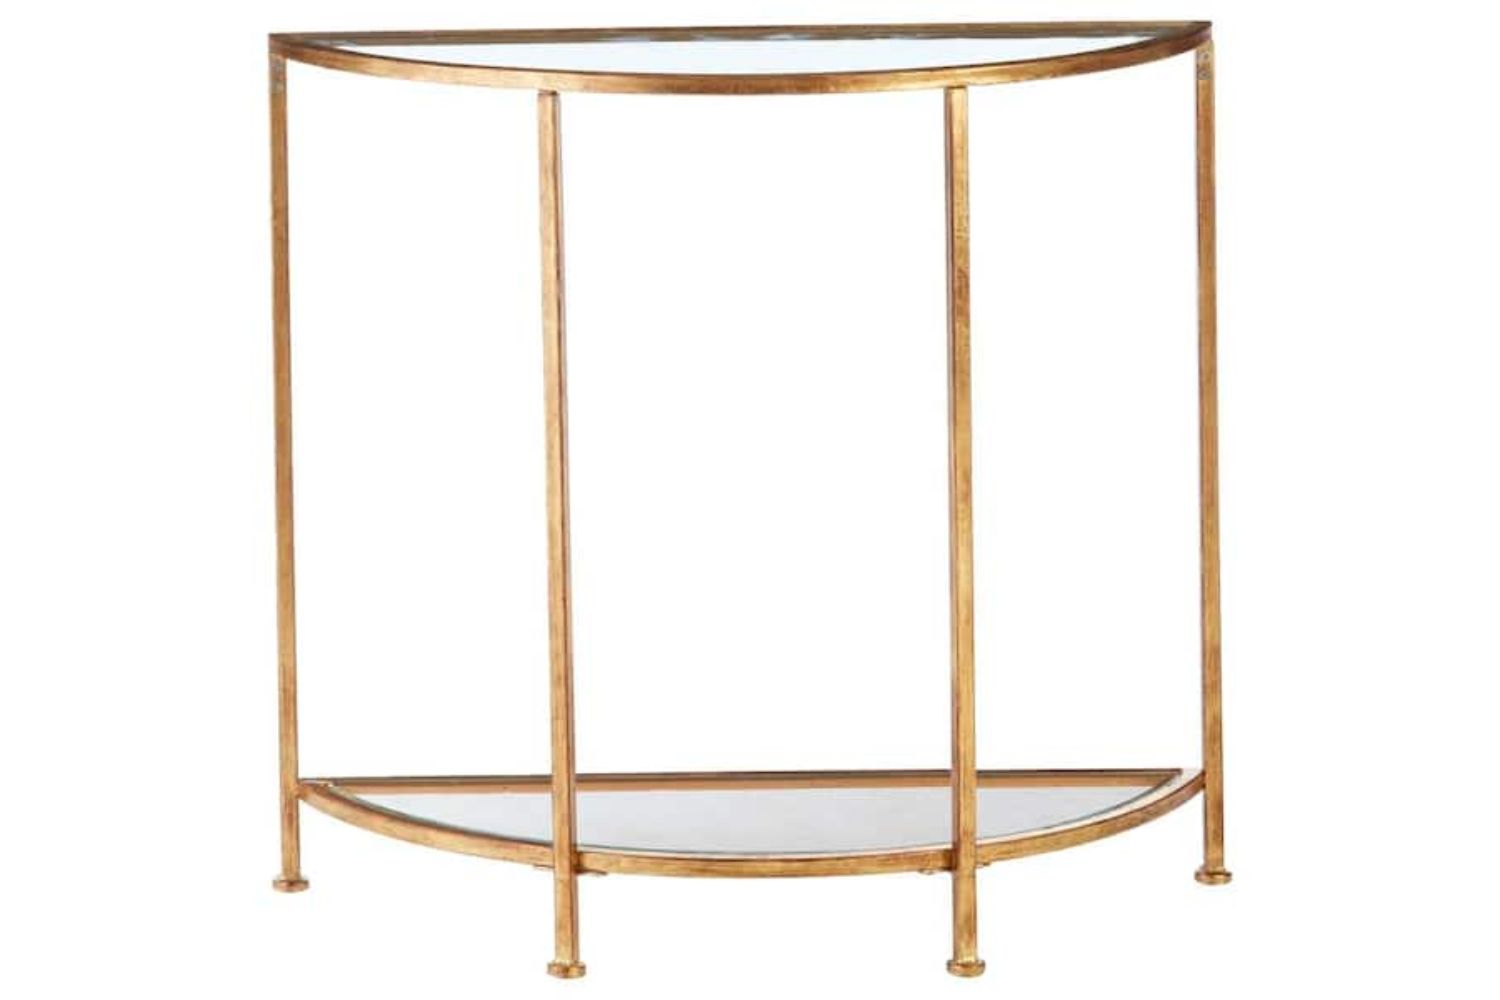 The Best Furniture You Can Find at Home Depot Right Now: Home Decorators Collection Bella 32 in. Gold Leaf Clear Standard Half Moon Glass Console Table